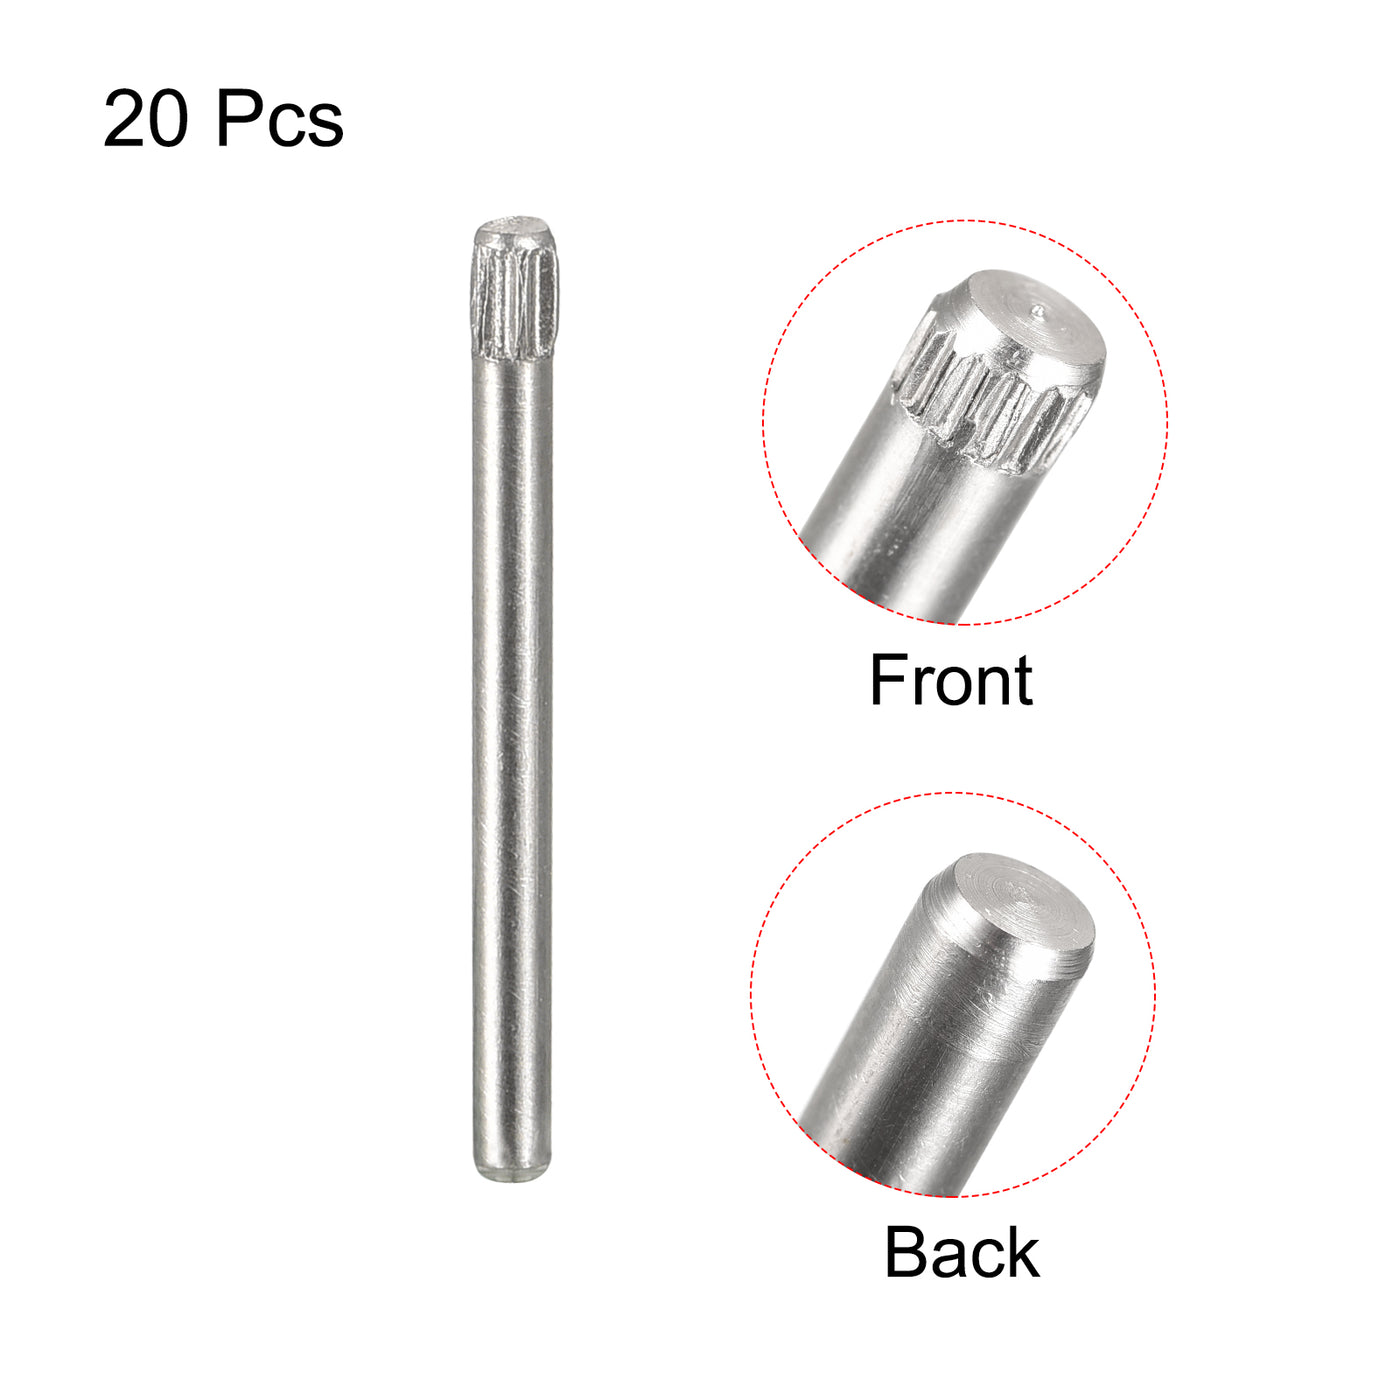 uxcell Uxcell 1.5x18mm 304 Stainless Steel Dowel Pins, 20Pcs Knurled Head Flat End Dowel Pin